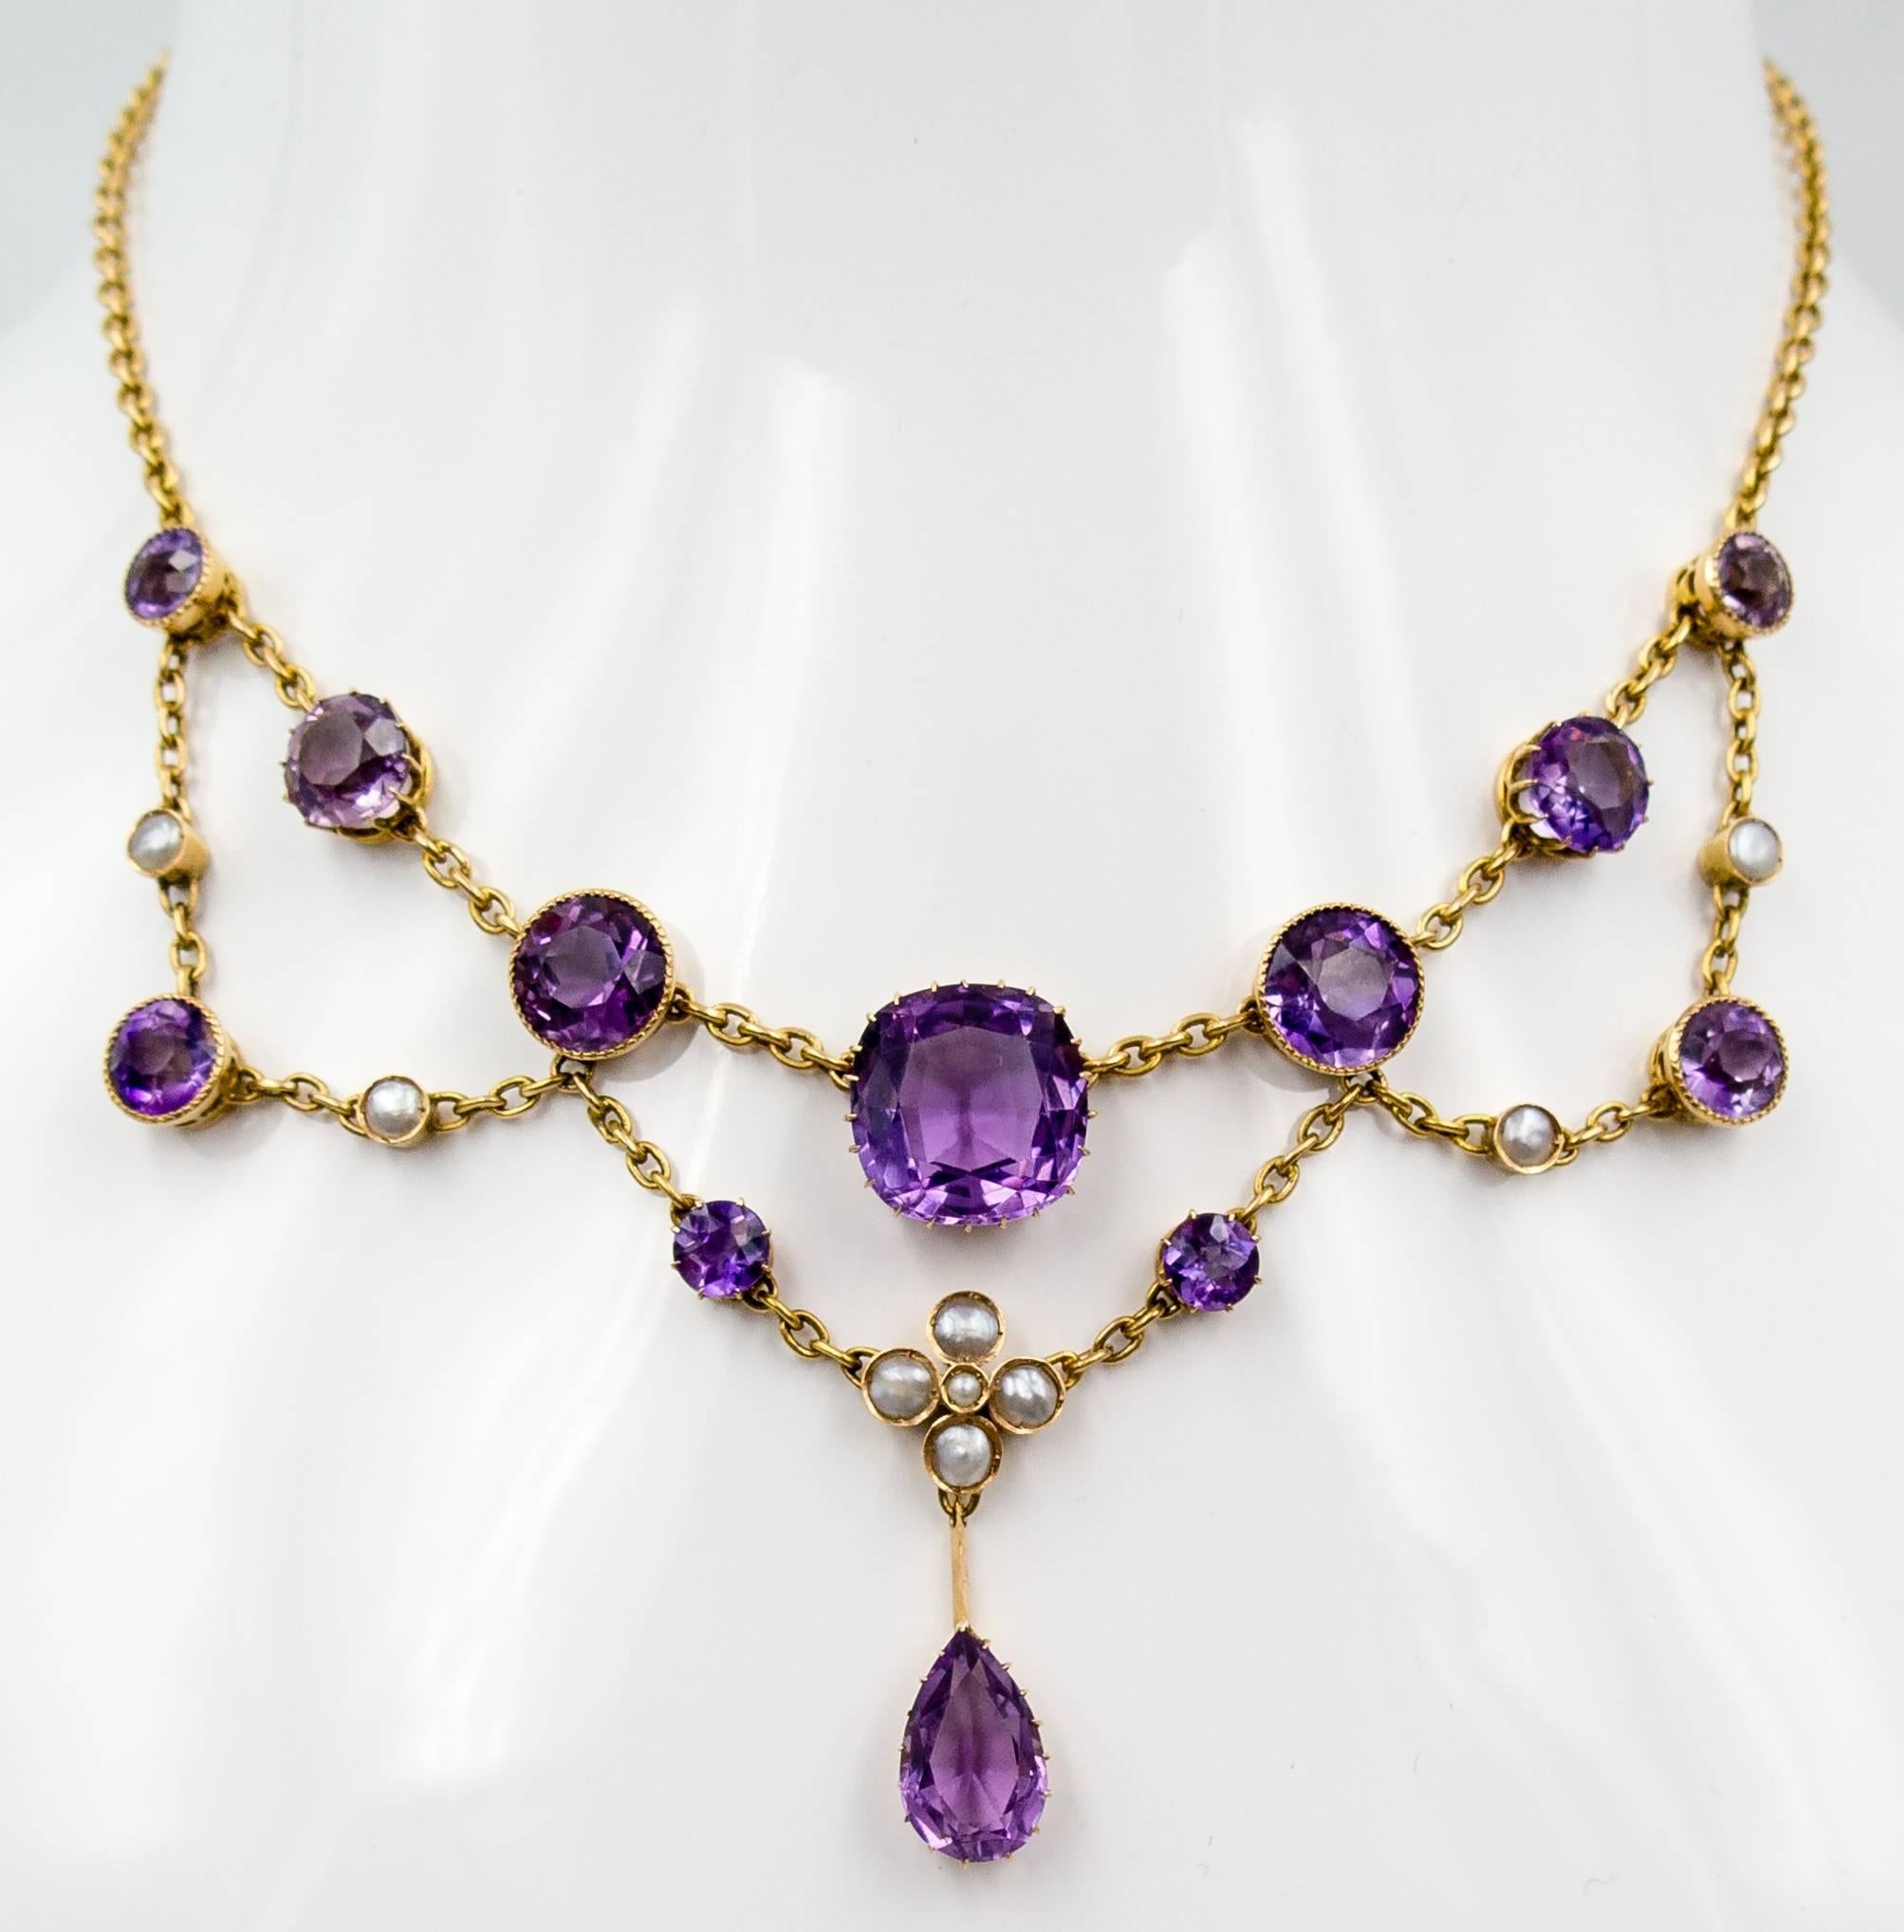 An elegant frame for any face, this lovely Victorian necklace consists of beautifully worked gold  chain linking both bezel and prong set pastel amethysts and pearls.  It measures 15 1/4" in length, and when fastened at the back, will